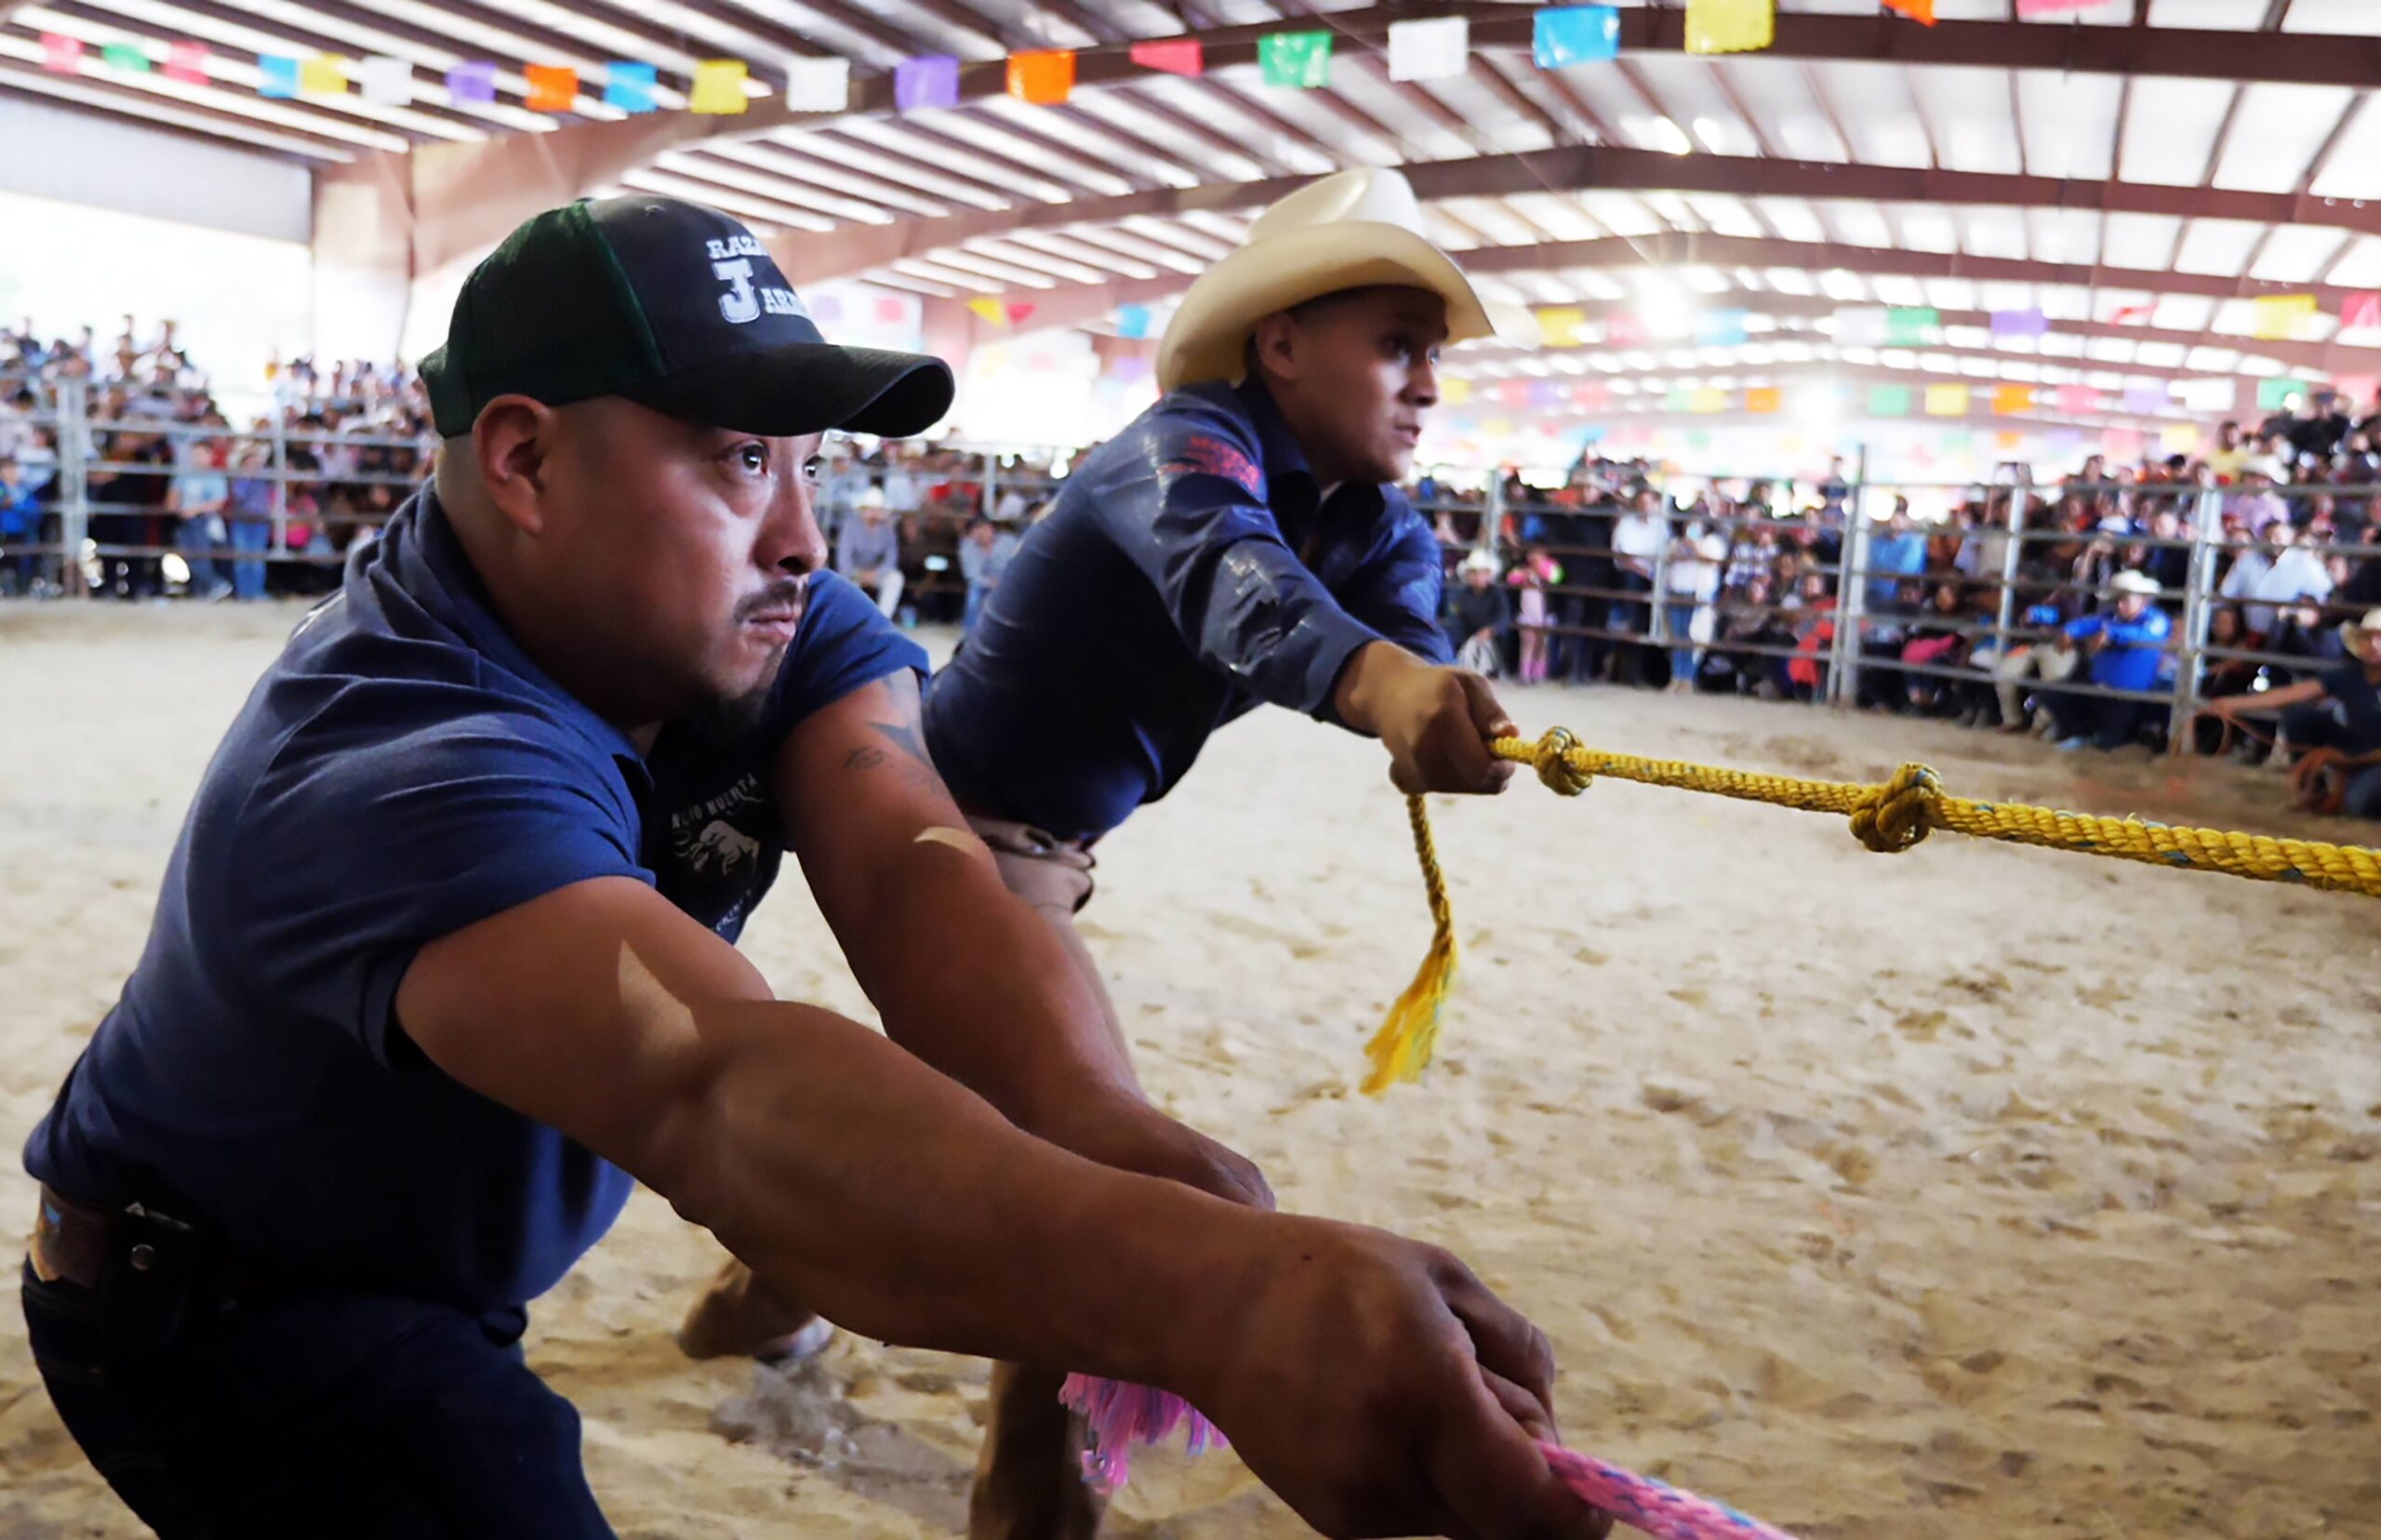 Tacho and Alan tug on two large ropes in the center of a sand-covered rodeo with determined looks on their faces as a blurred crowd looks on from behind a fence.